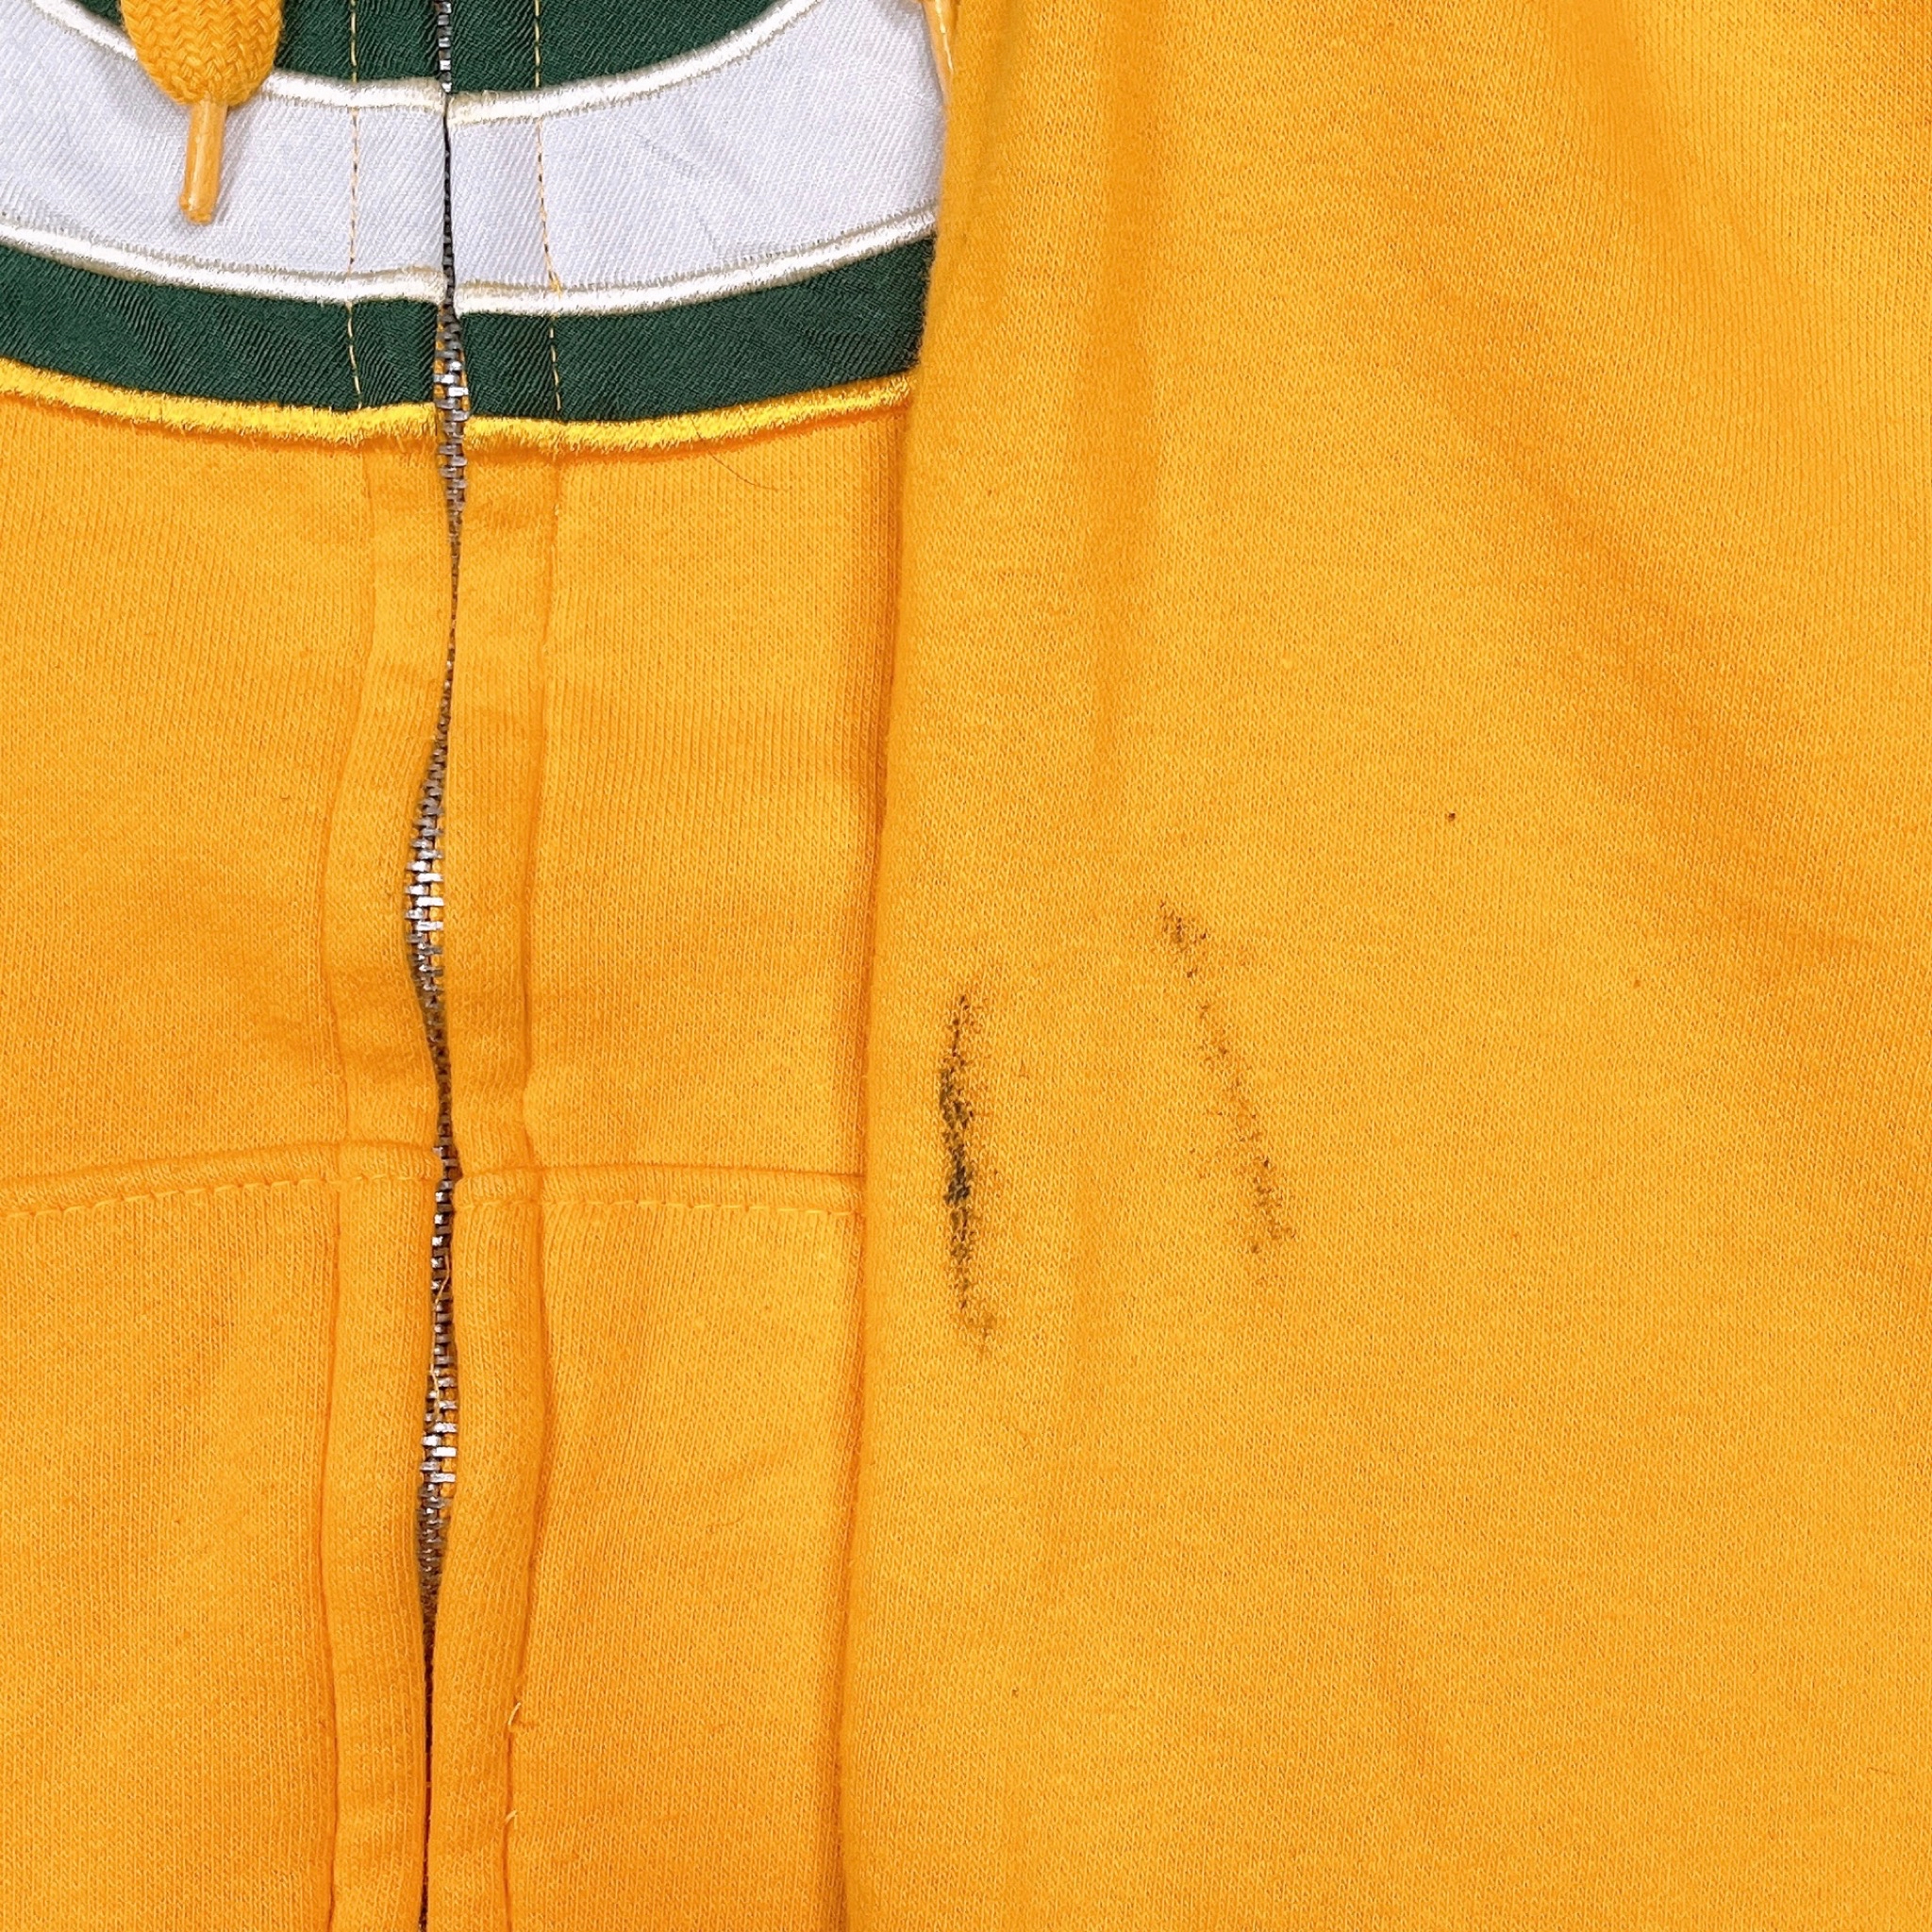 Lsize NFL Green Bay Packers fullzip